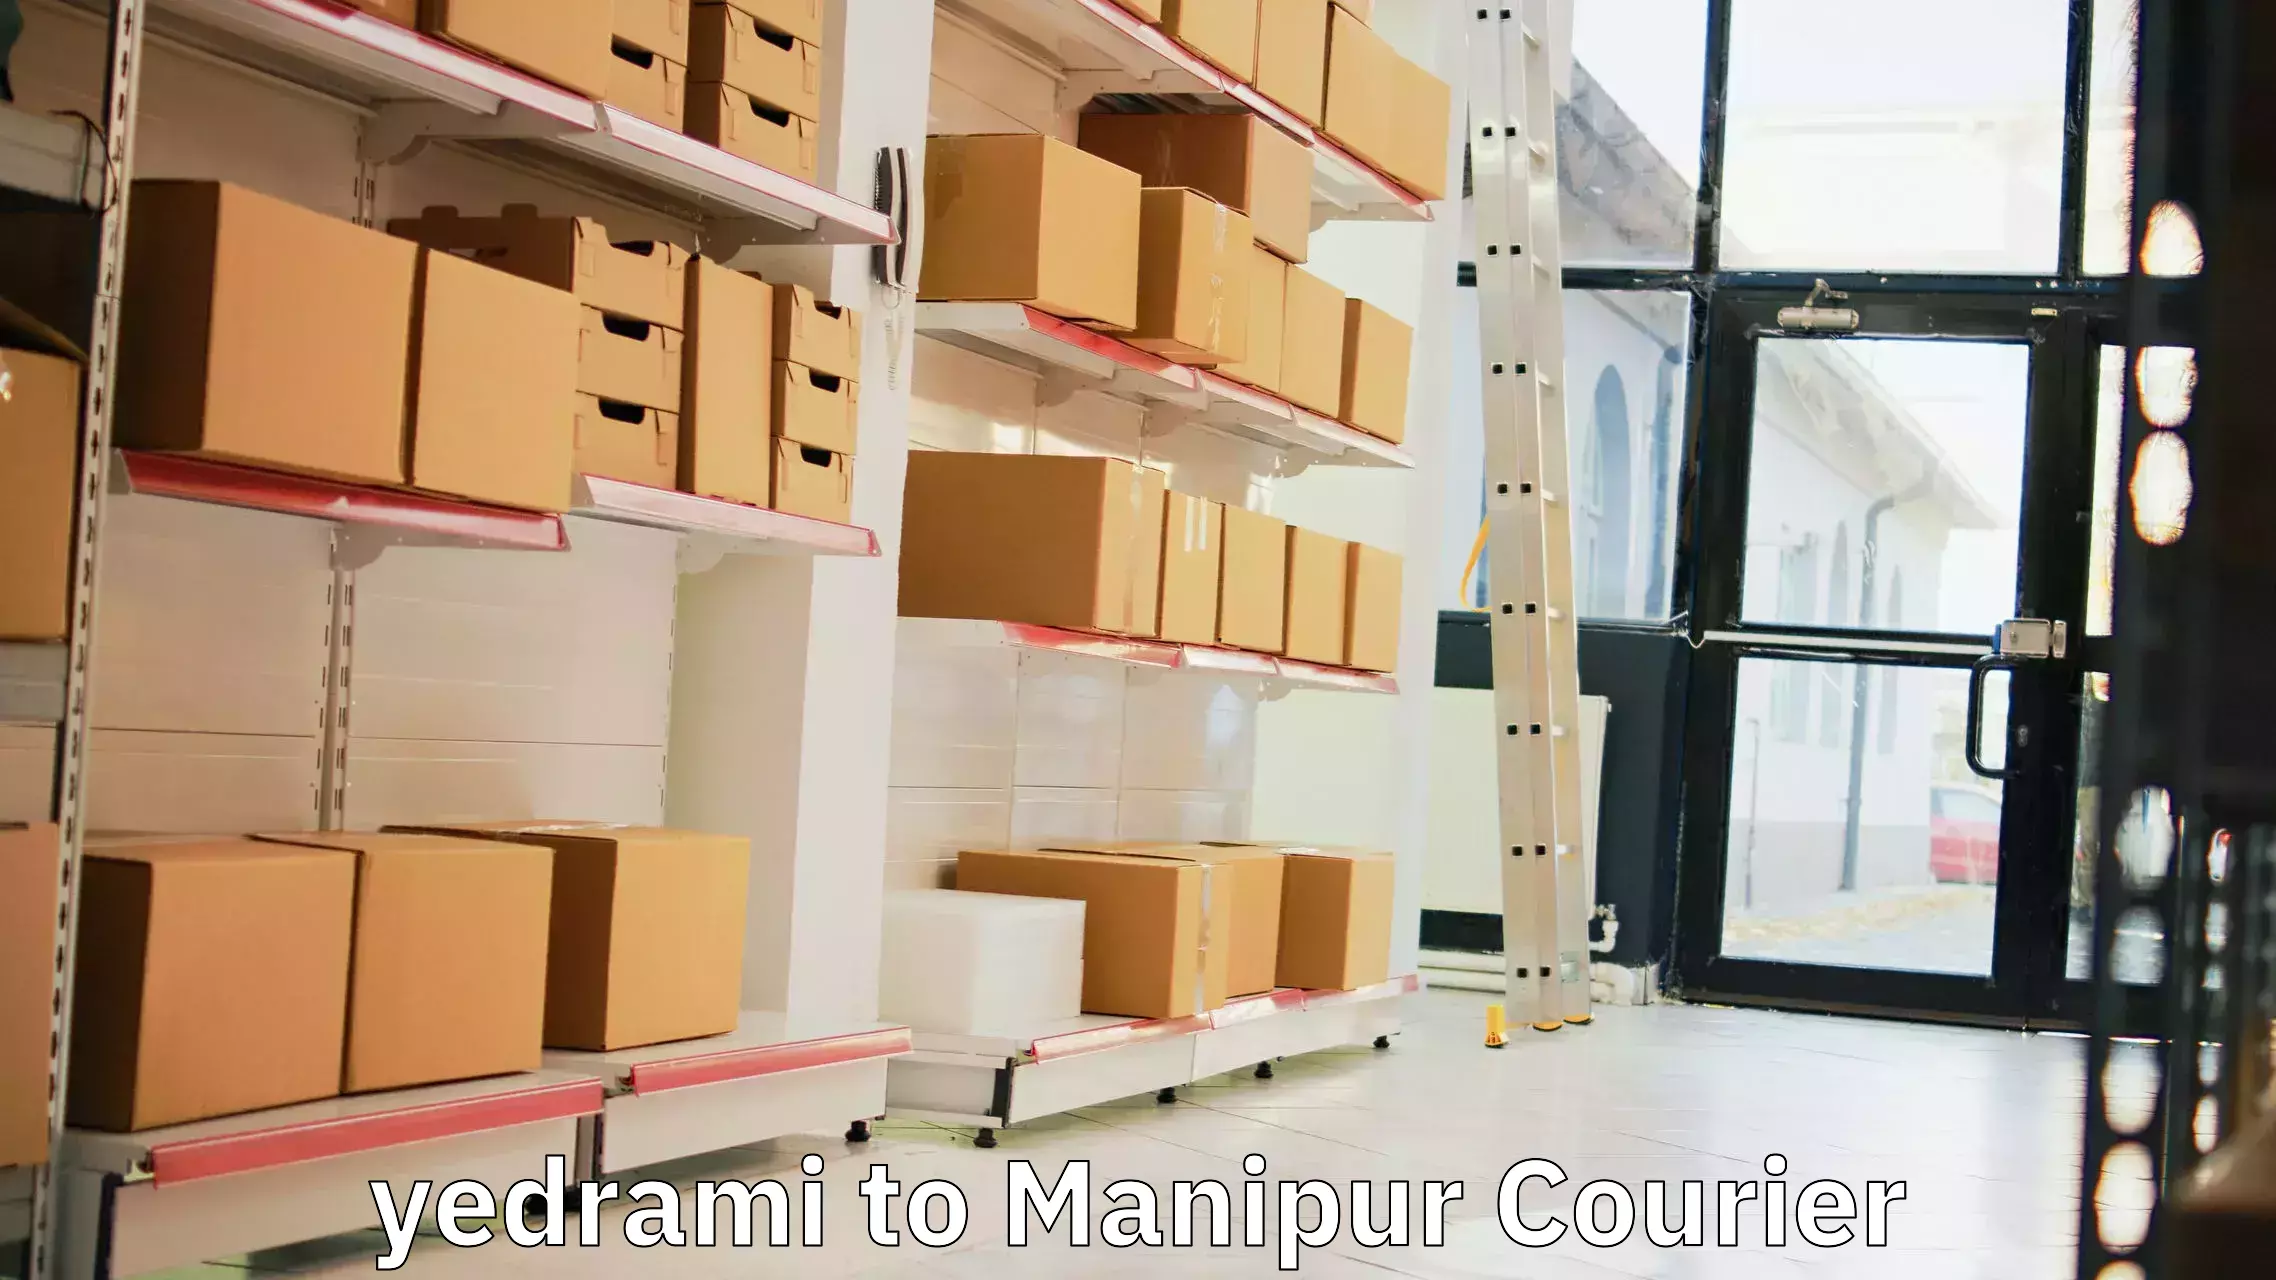 Customer-friendly courier services yedrami to Manipur